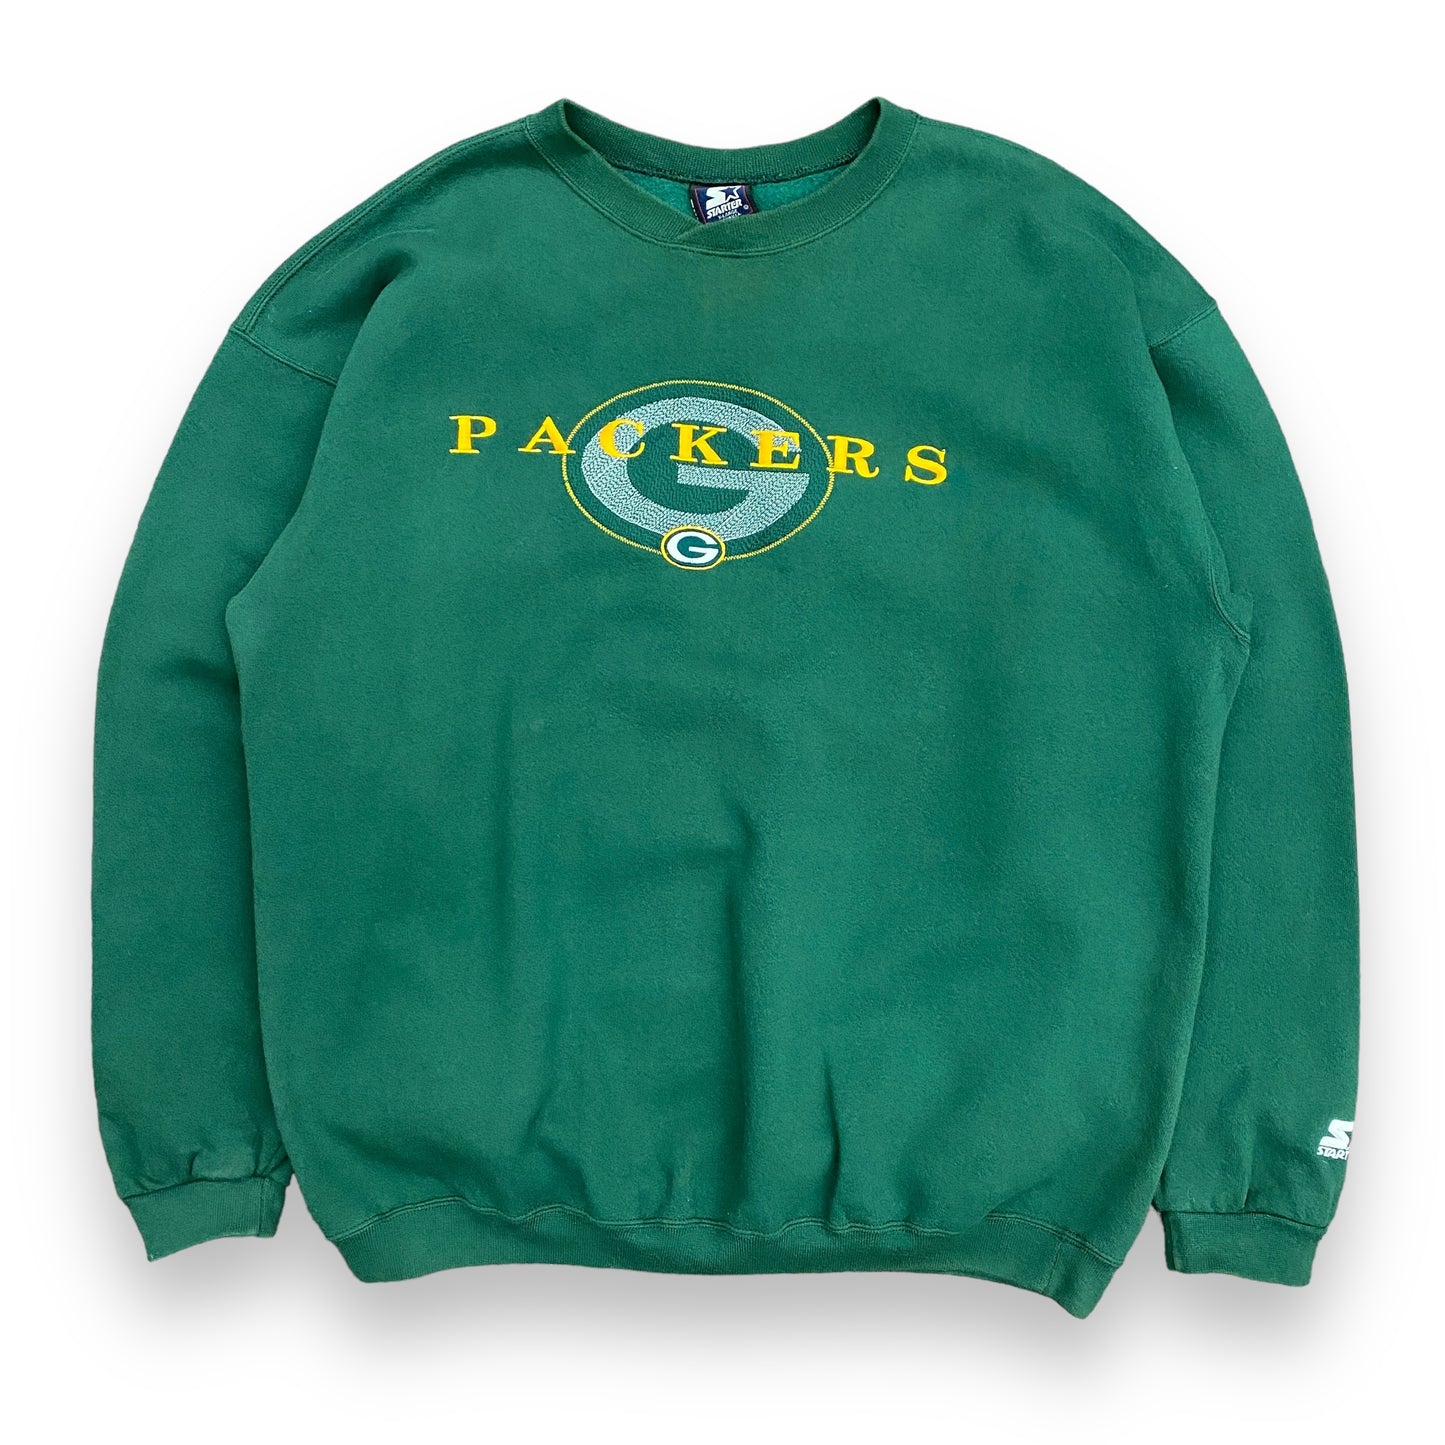 Vintage 90s Starter Green Bay Packers NFL Embroidered Sweatshirt - Size XL